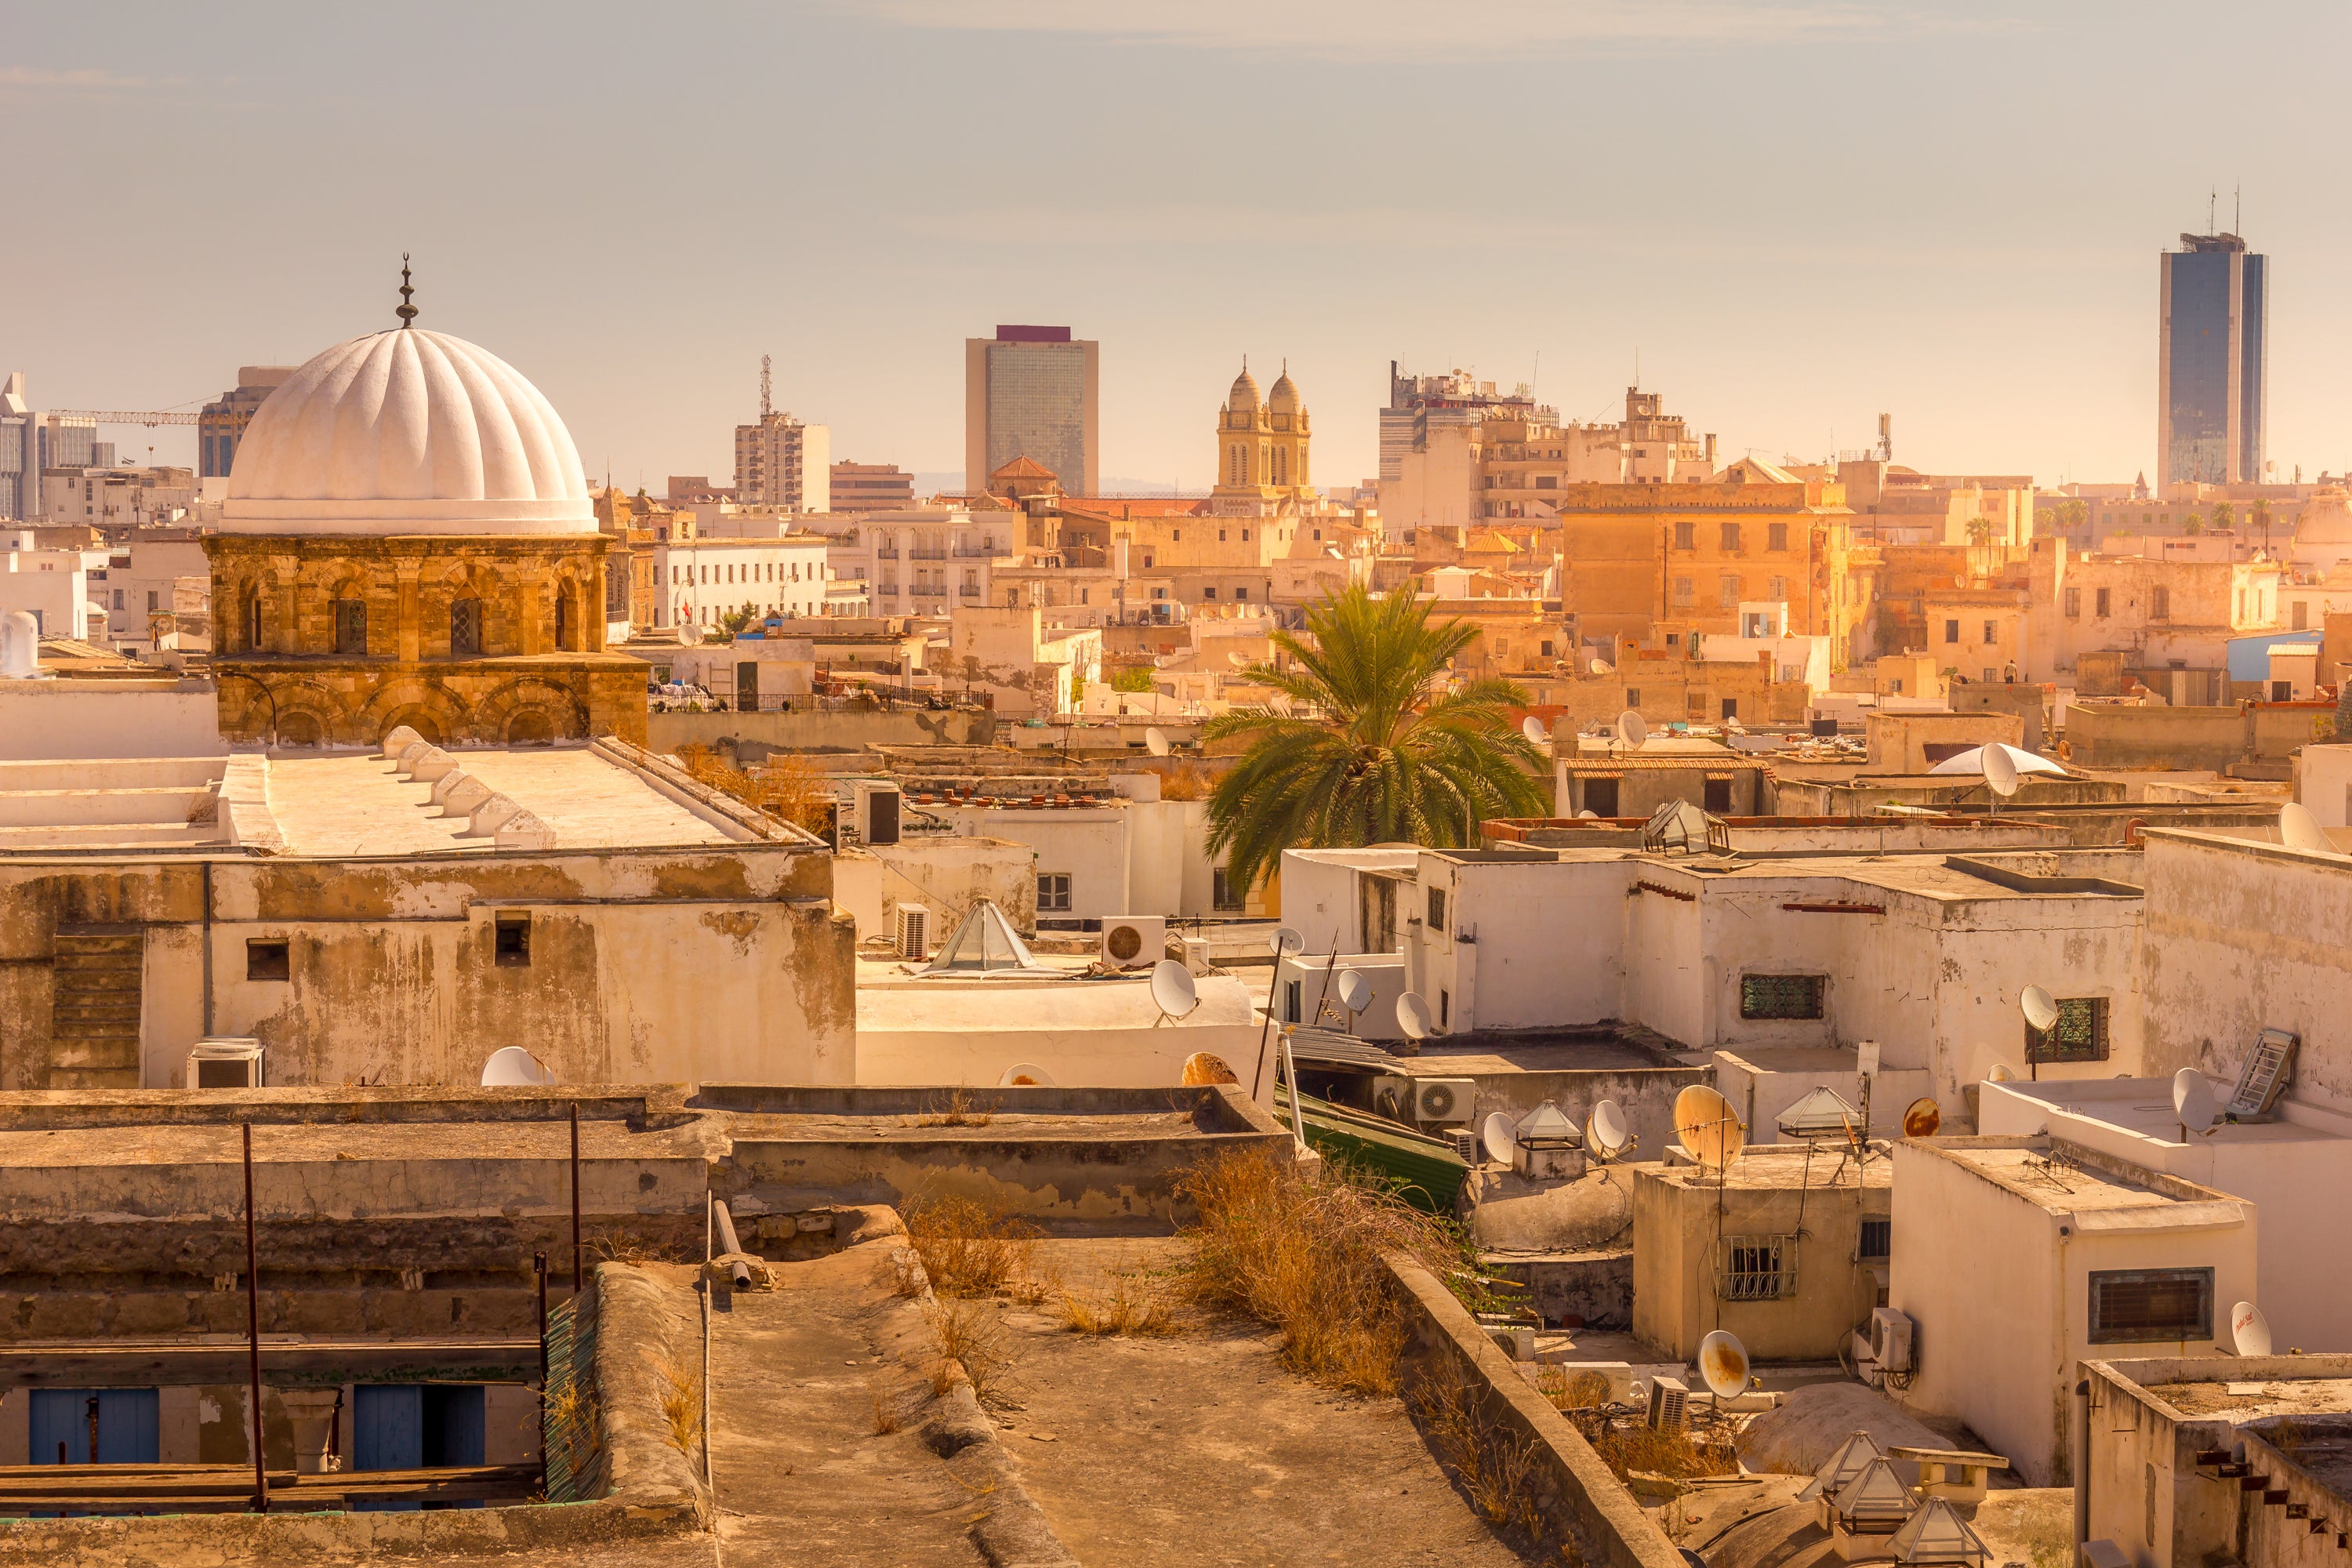 See the ancient treasures of Tunis on a tour of North Africa